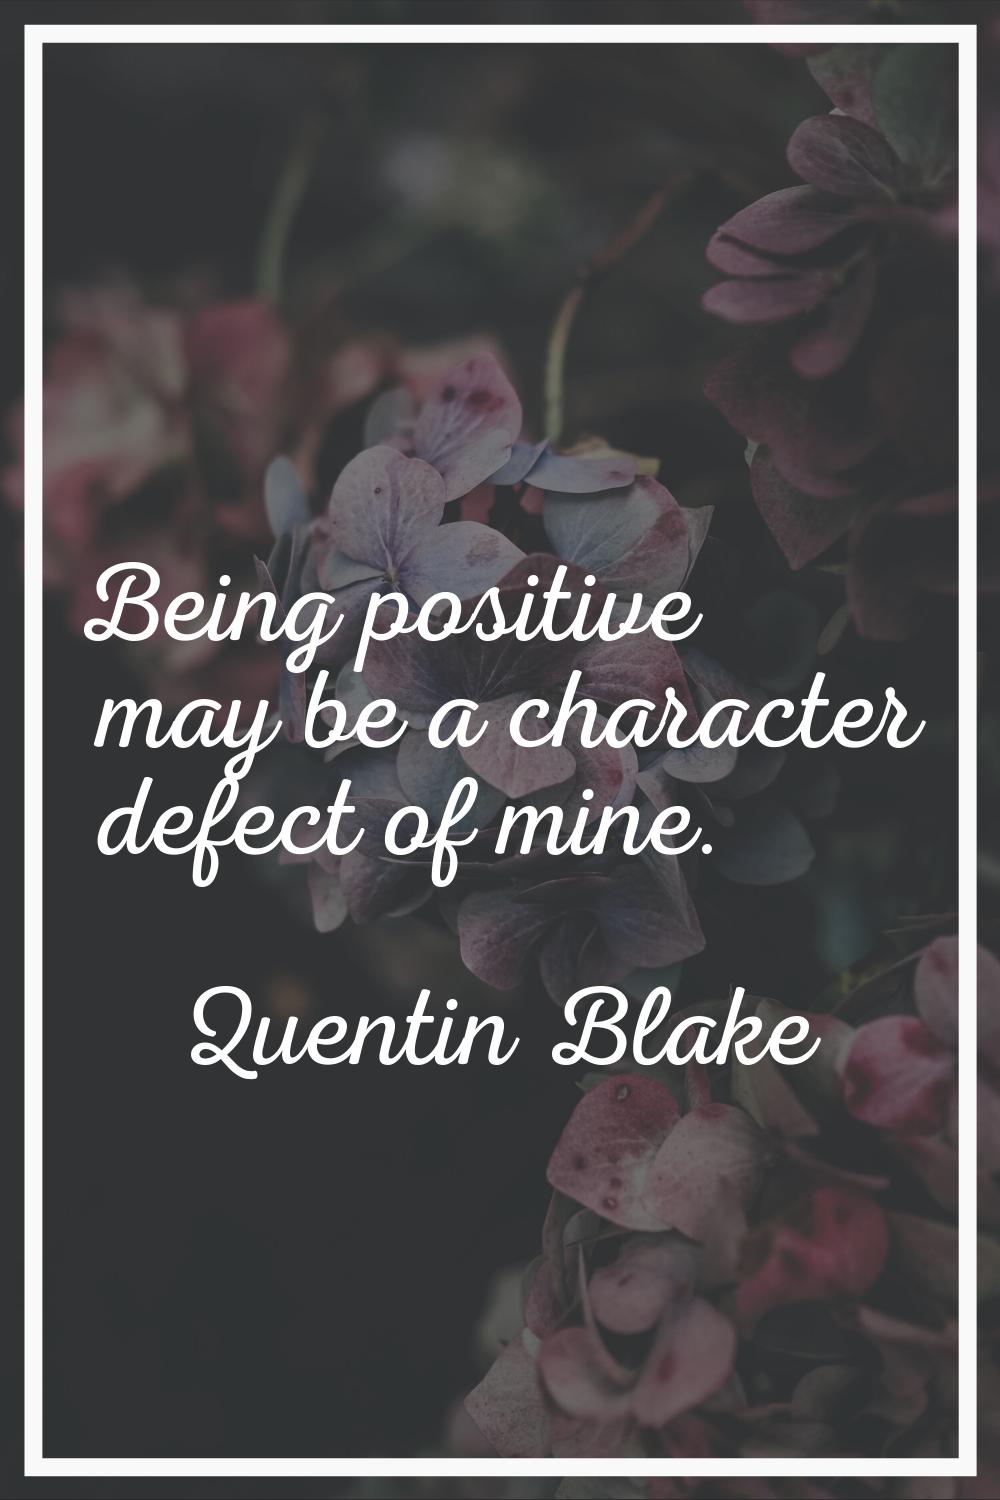 Being positive may be a character defect of mine.